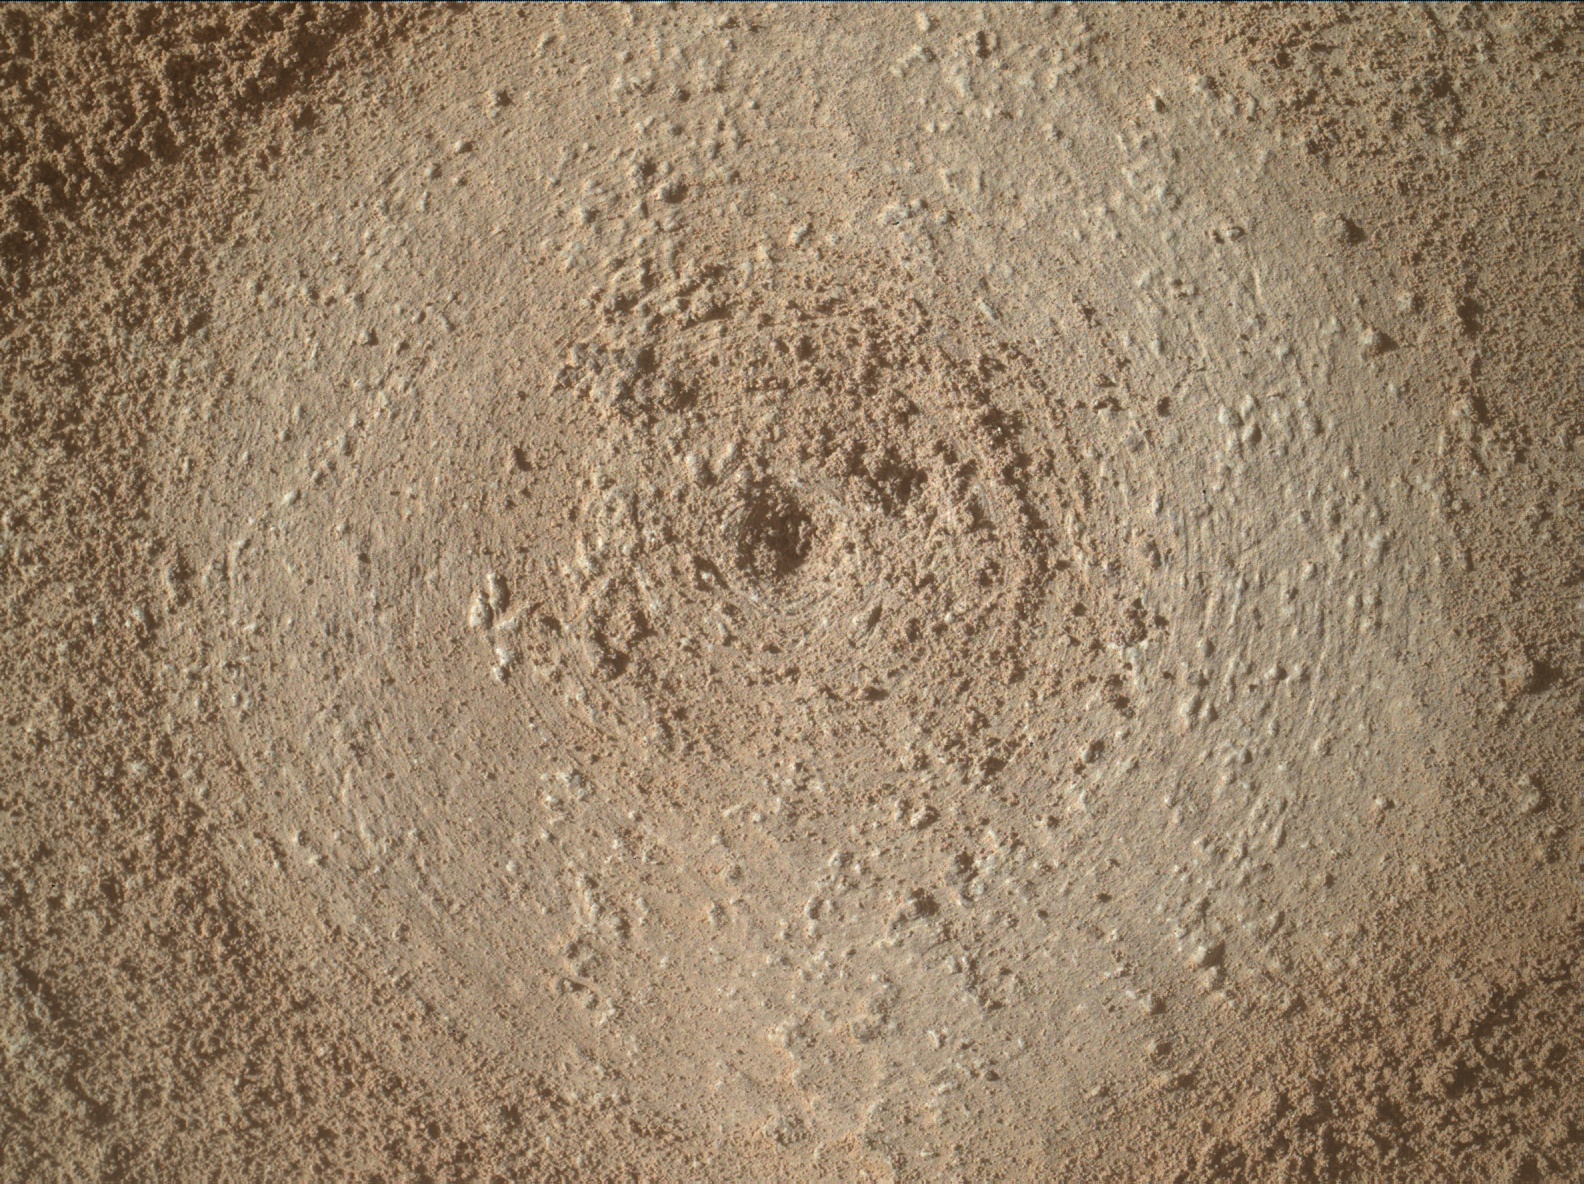 Nasa's Mars rover Curiosity acquired this image using its Mars Hand Lens Imager (MAHLI) on Sol 3877